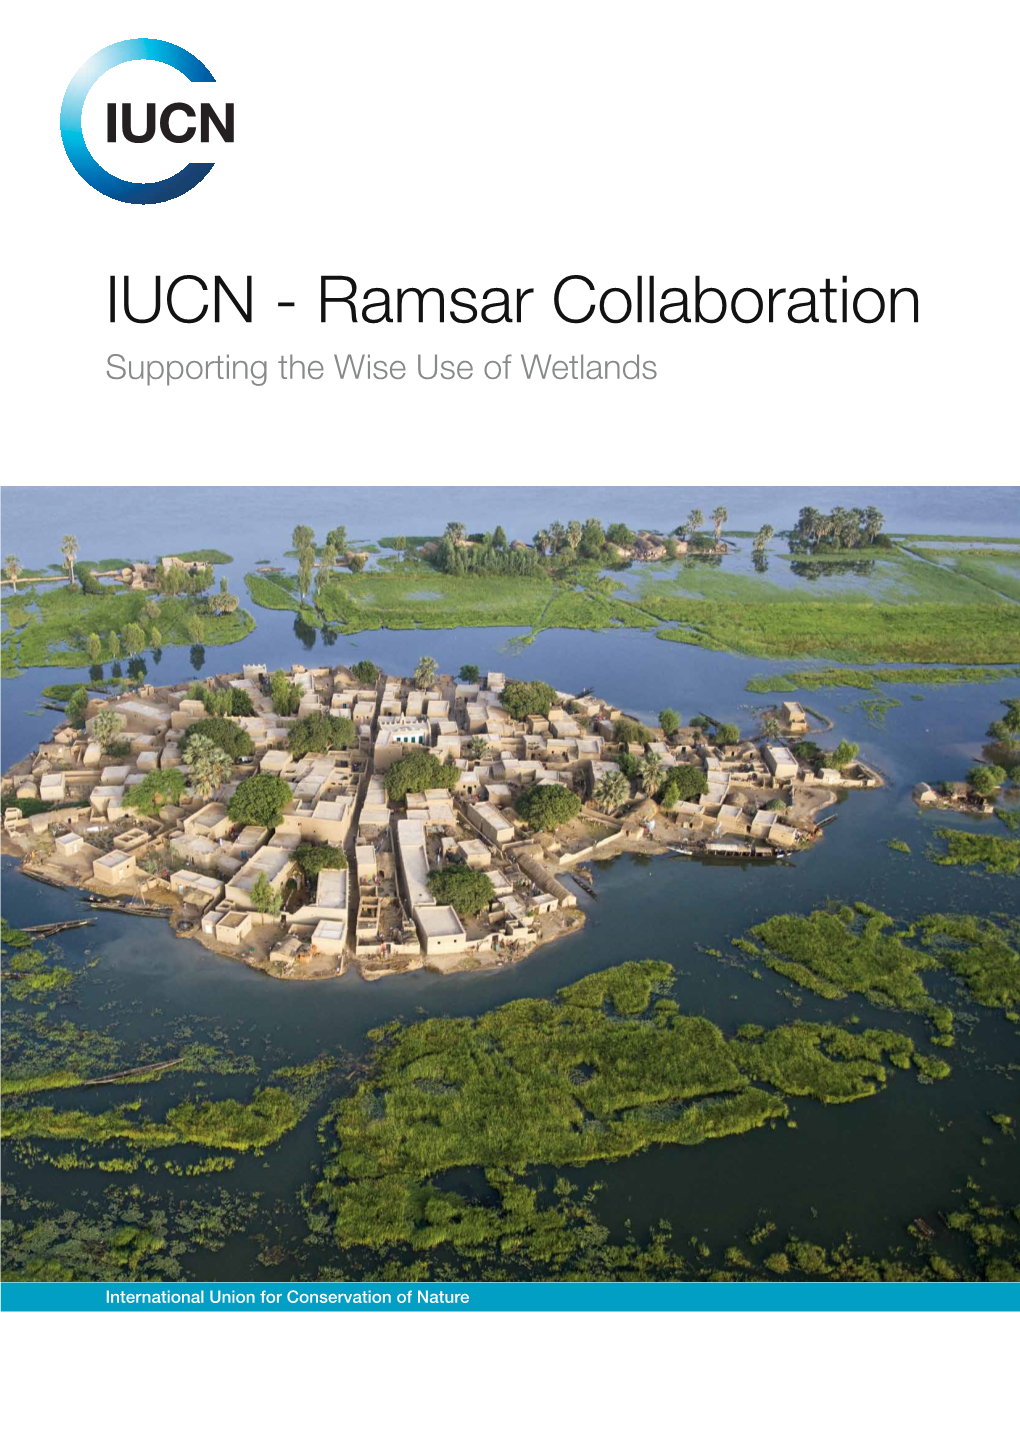 IUCN - Ramsar Collaboration Supporting the Wise Use of Wetlands